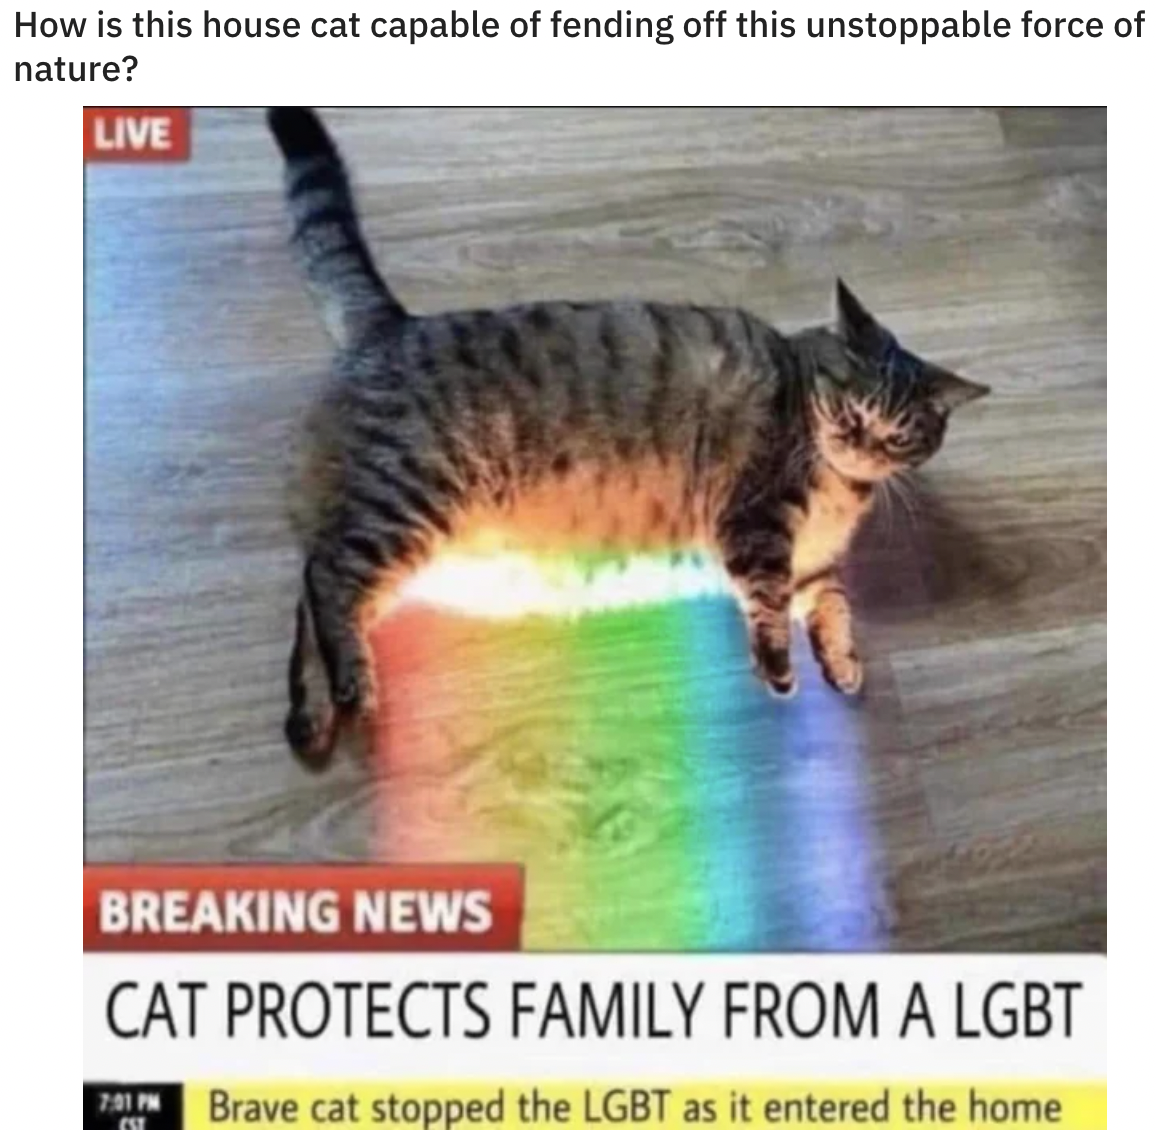 ok magazine - How is this house cat capable of fending off this unstoppable force of nature? Live Breaking News Cat Protects Family From A Lgbt Brave cat stopped the Lgbt as it entered the home est